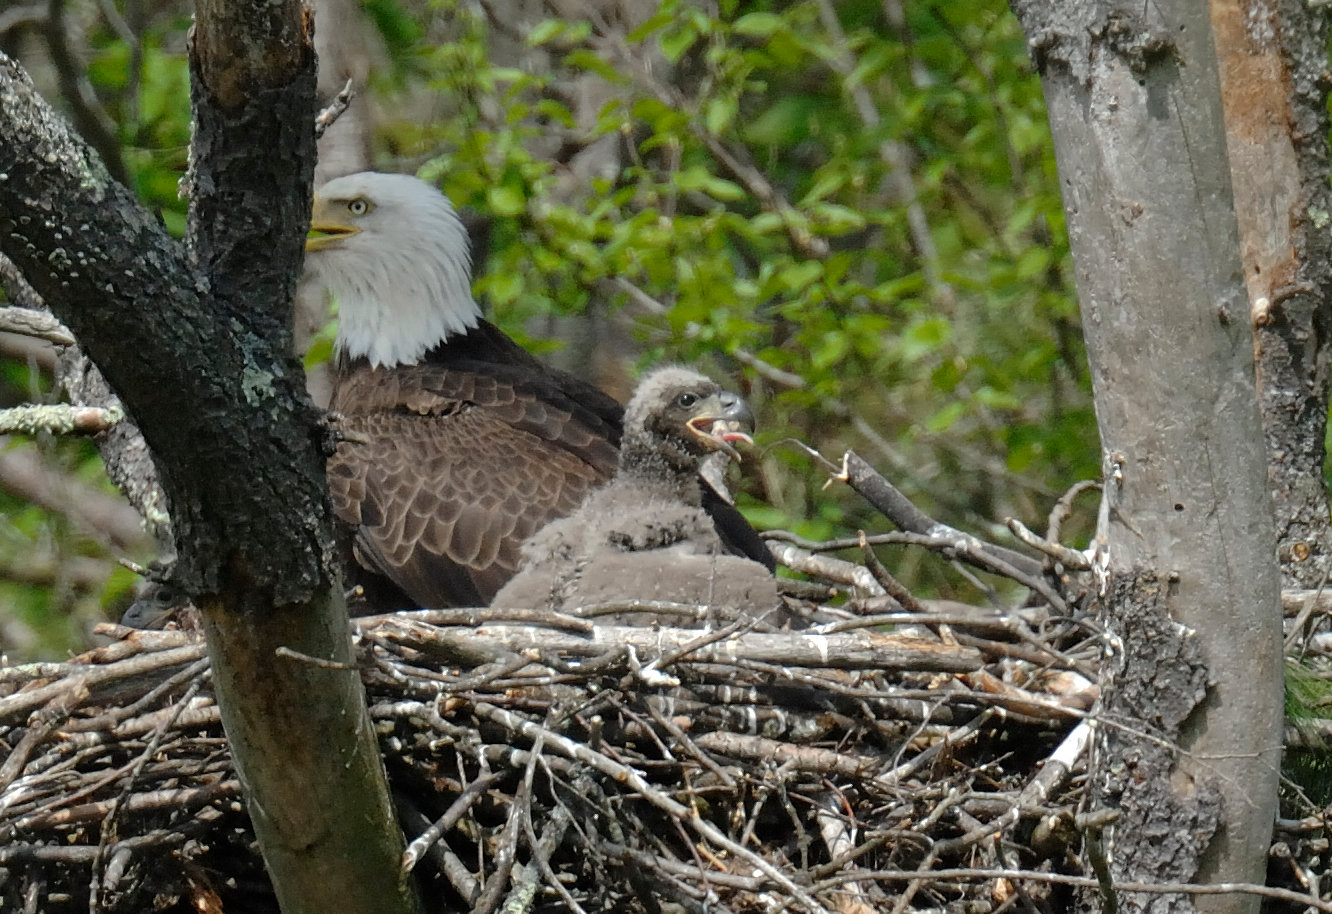 This eaglet is about three weeks old and has its gray secondary coat of down feathers. These feathers are thicker than primary down feathers which helps the eaglet stay warm during cooler days. A few tiny pin feathers are already pushing through the down, and the shafts of flight feathers are visible on the trailing edge of the wings.